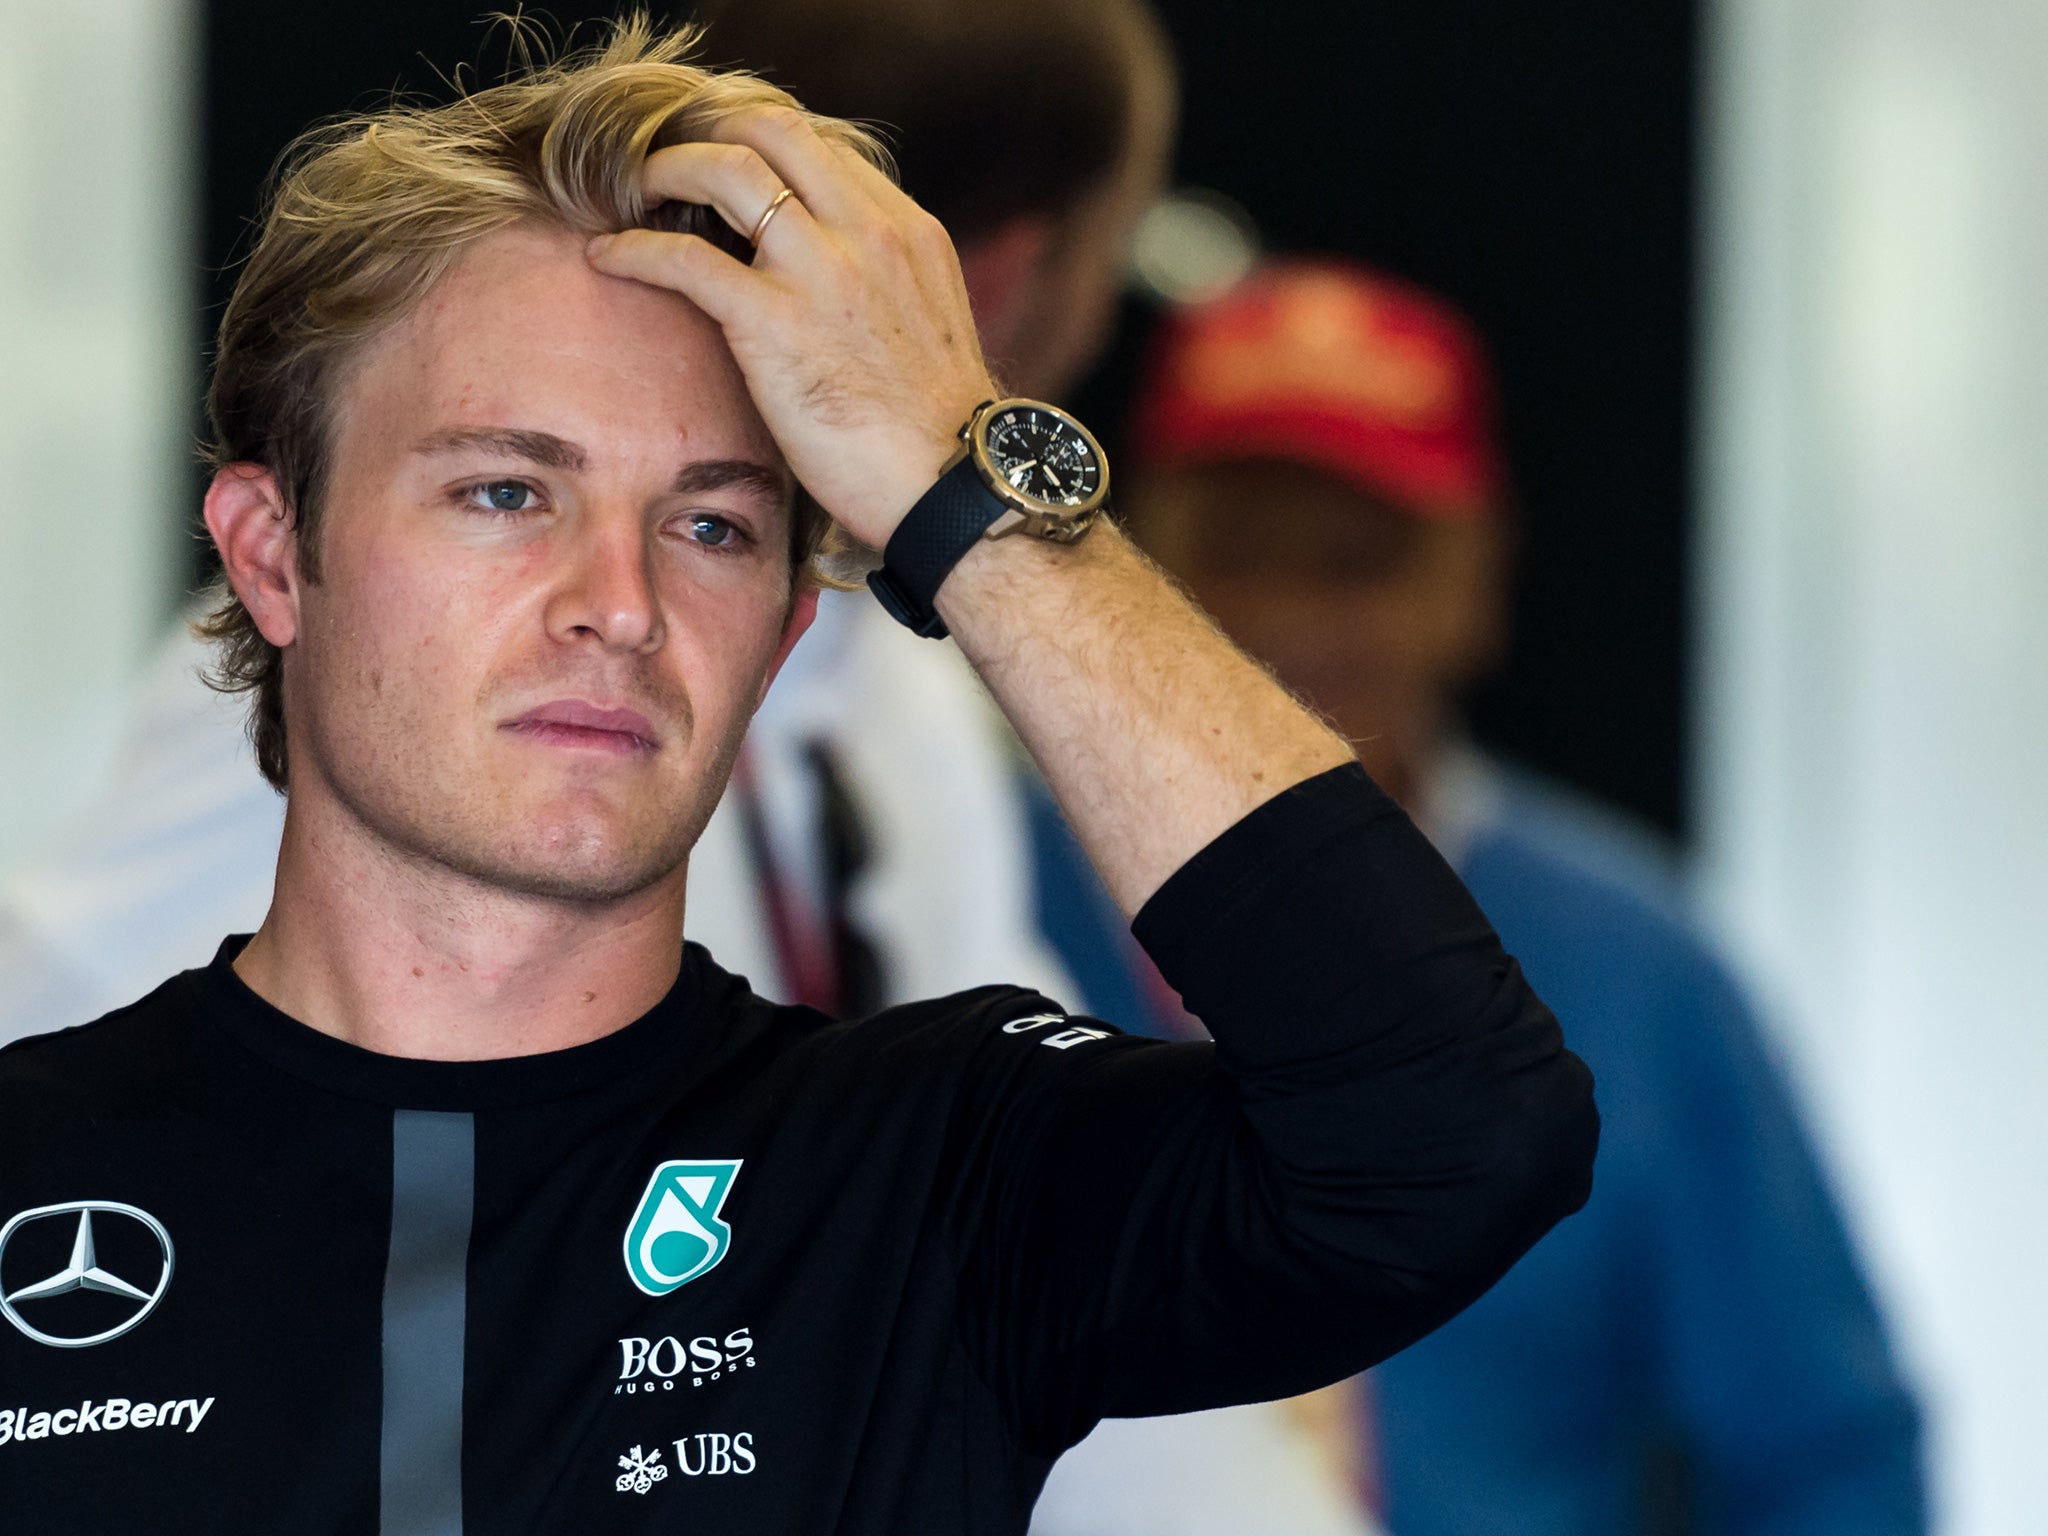 Nico Rosberg said that his mishap was not down to the skill of the Mercedes driver